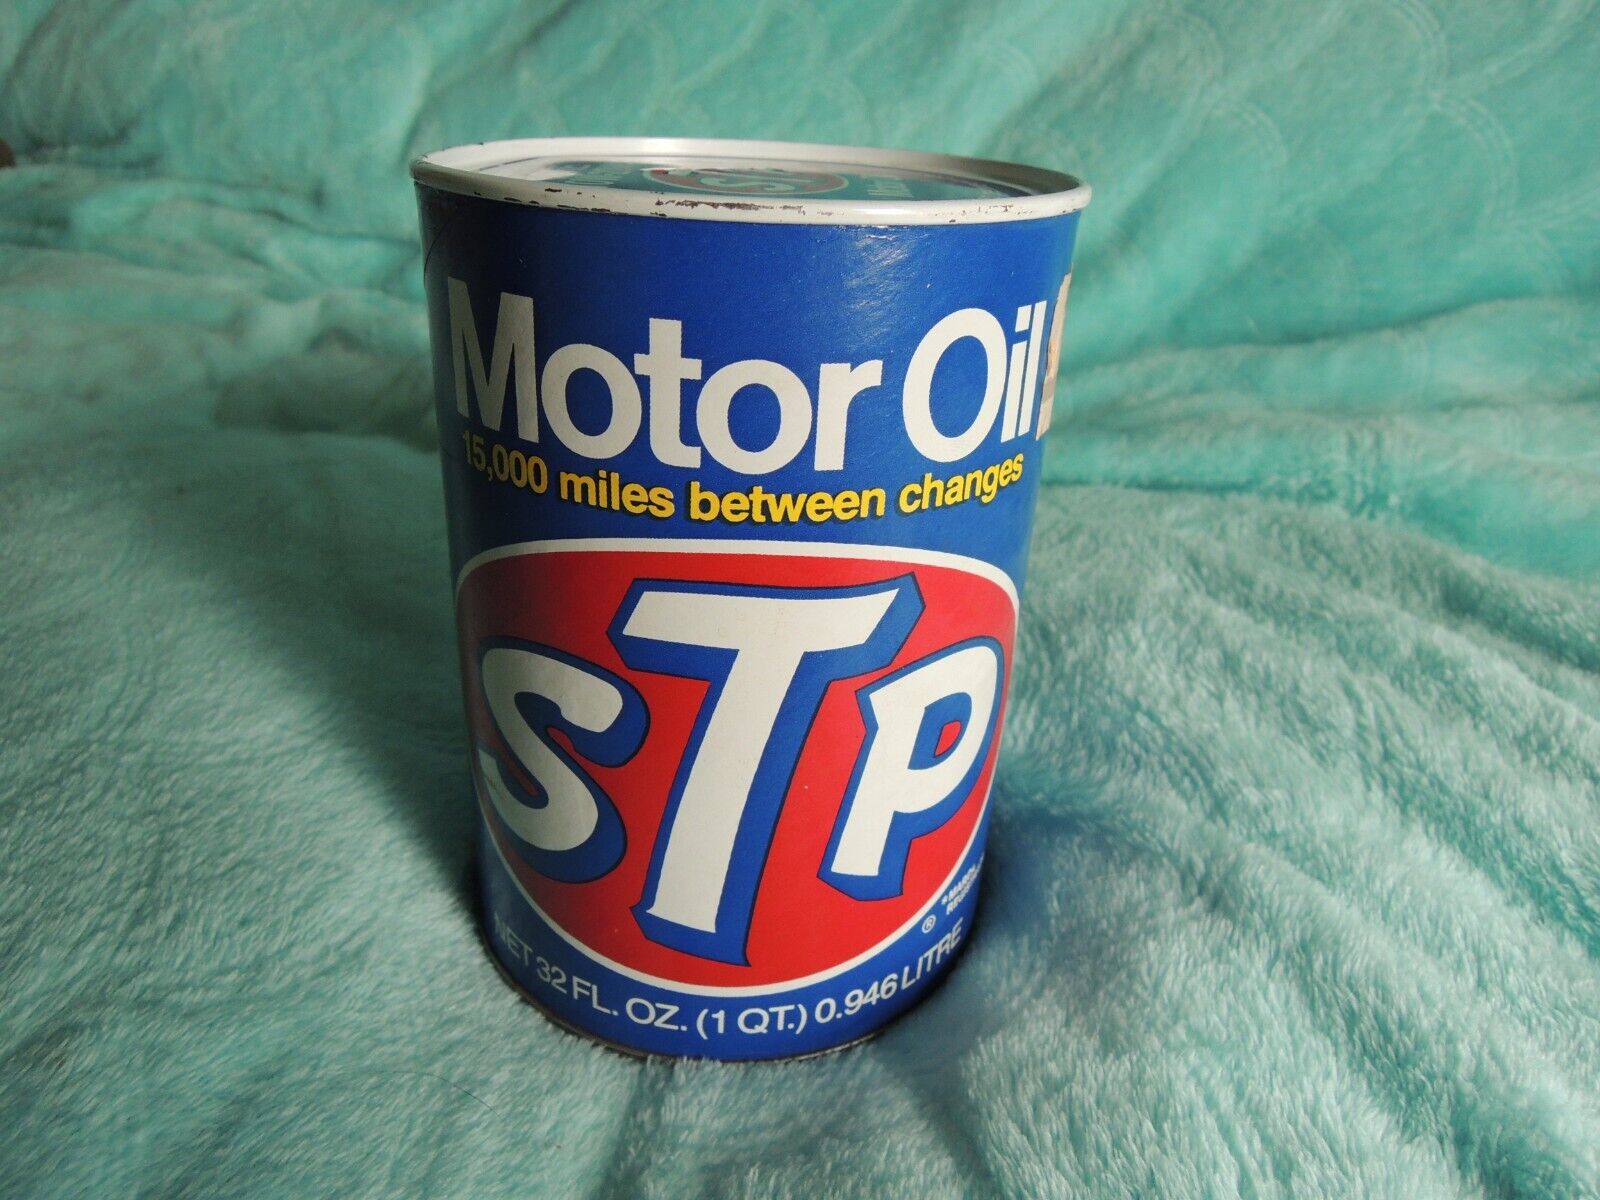 Vintage 1978 STP Motor Oil Can 10W 20W-50 Quart. Un-opened. Made in USA.